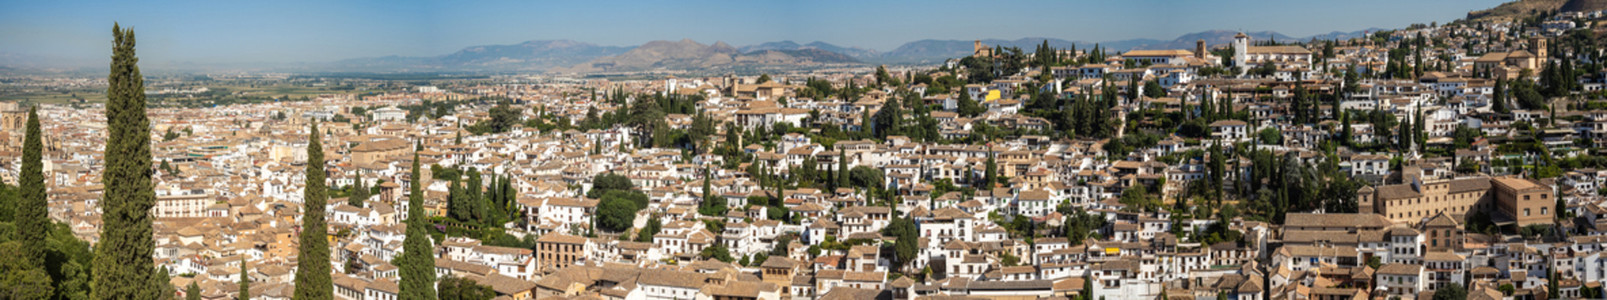 Albayzin district of Granada  Spain  from the towers of the Alhambra